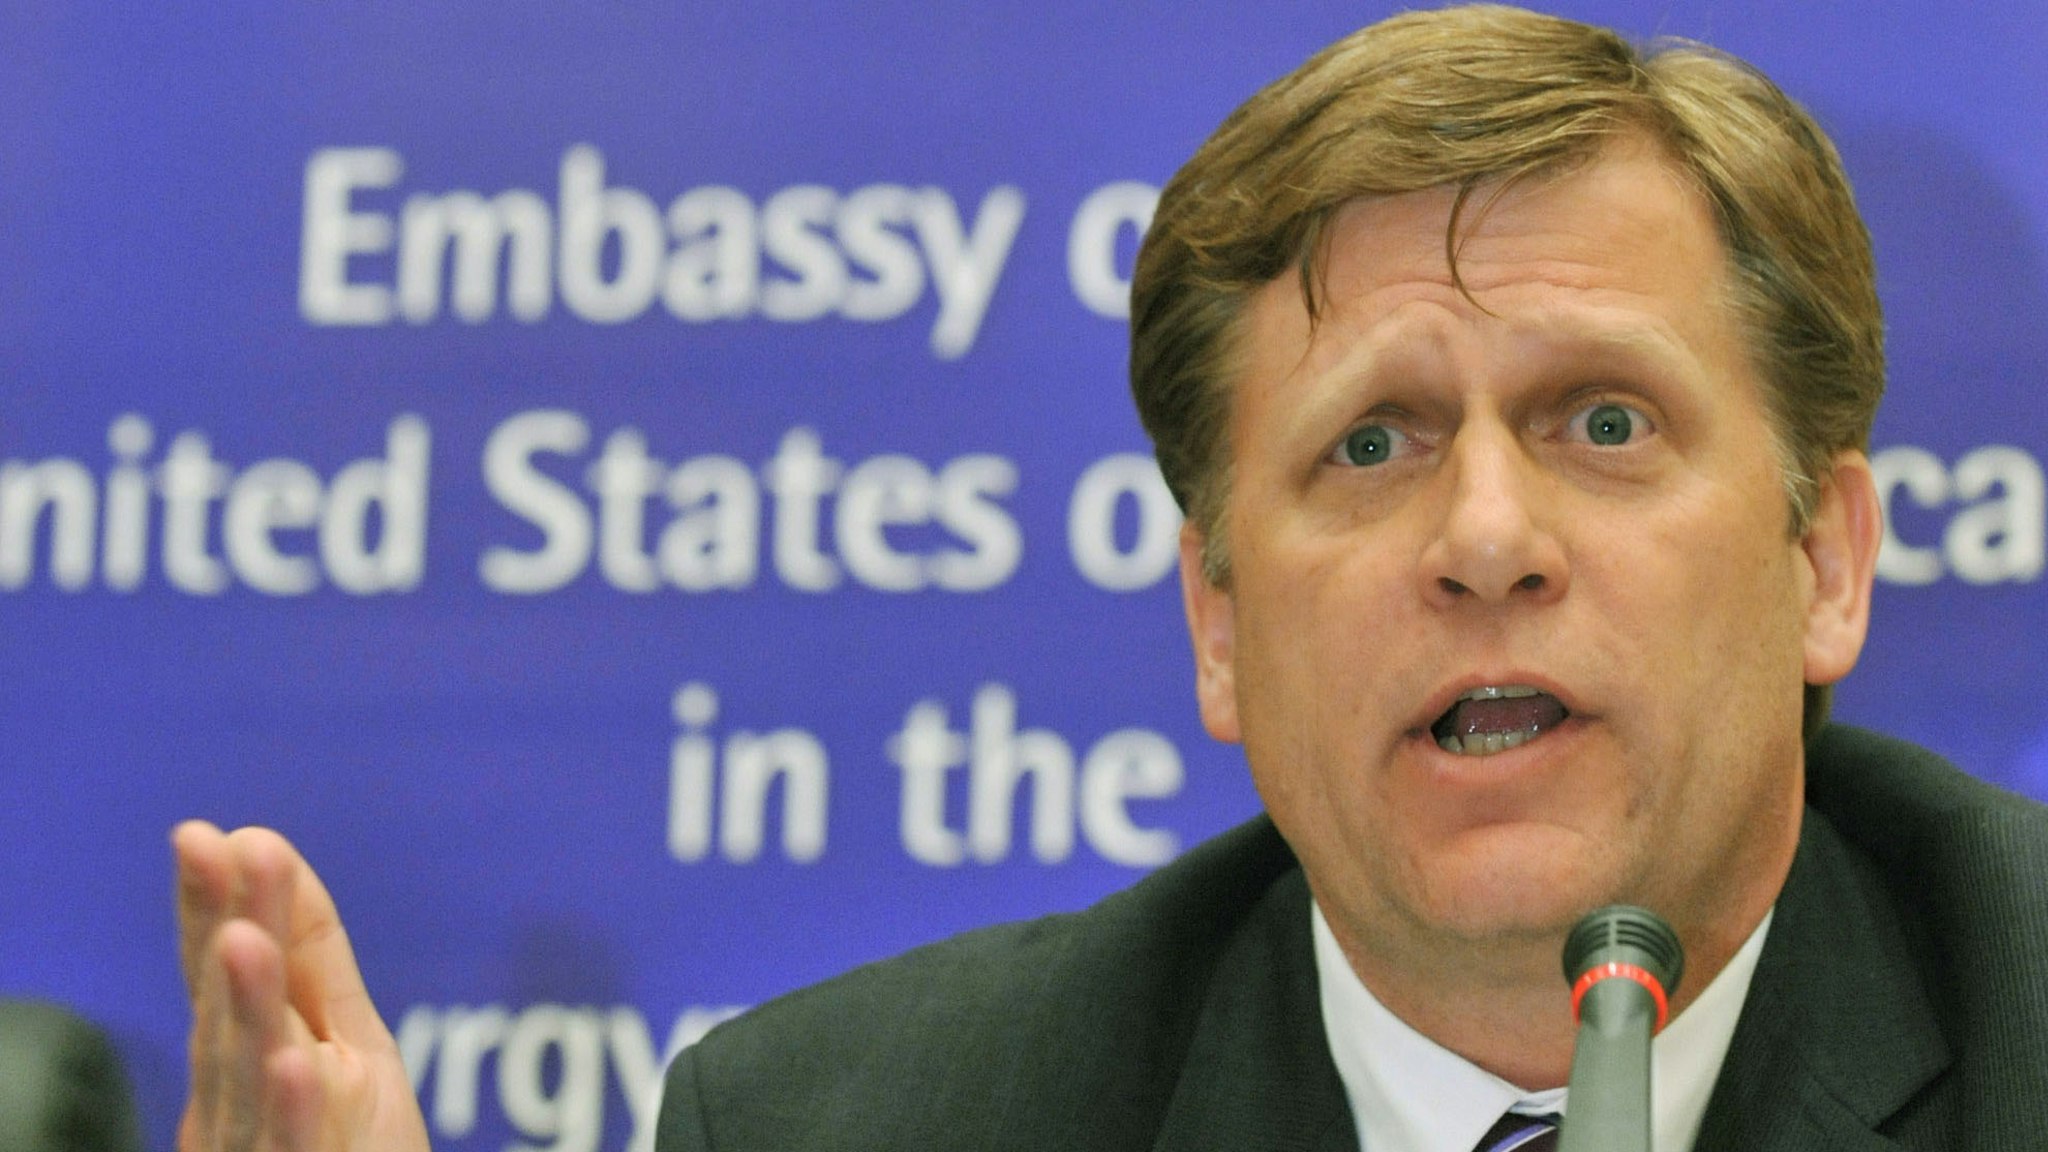 US special Assistant to the President for National Security Michael McFaul speaks during the press conference in Bishkek on May 4, 2010.